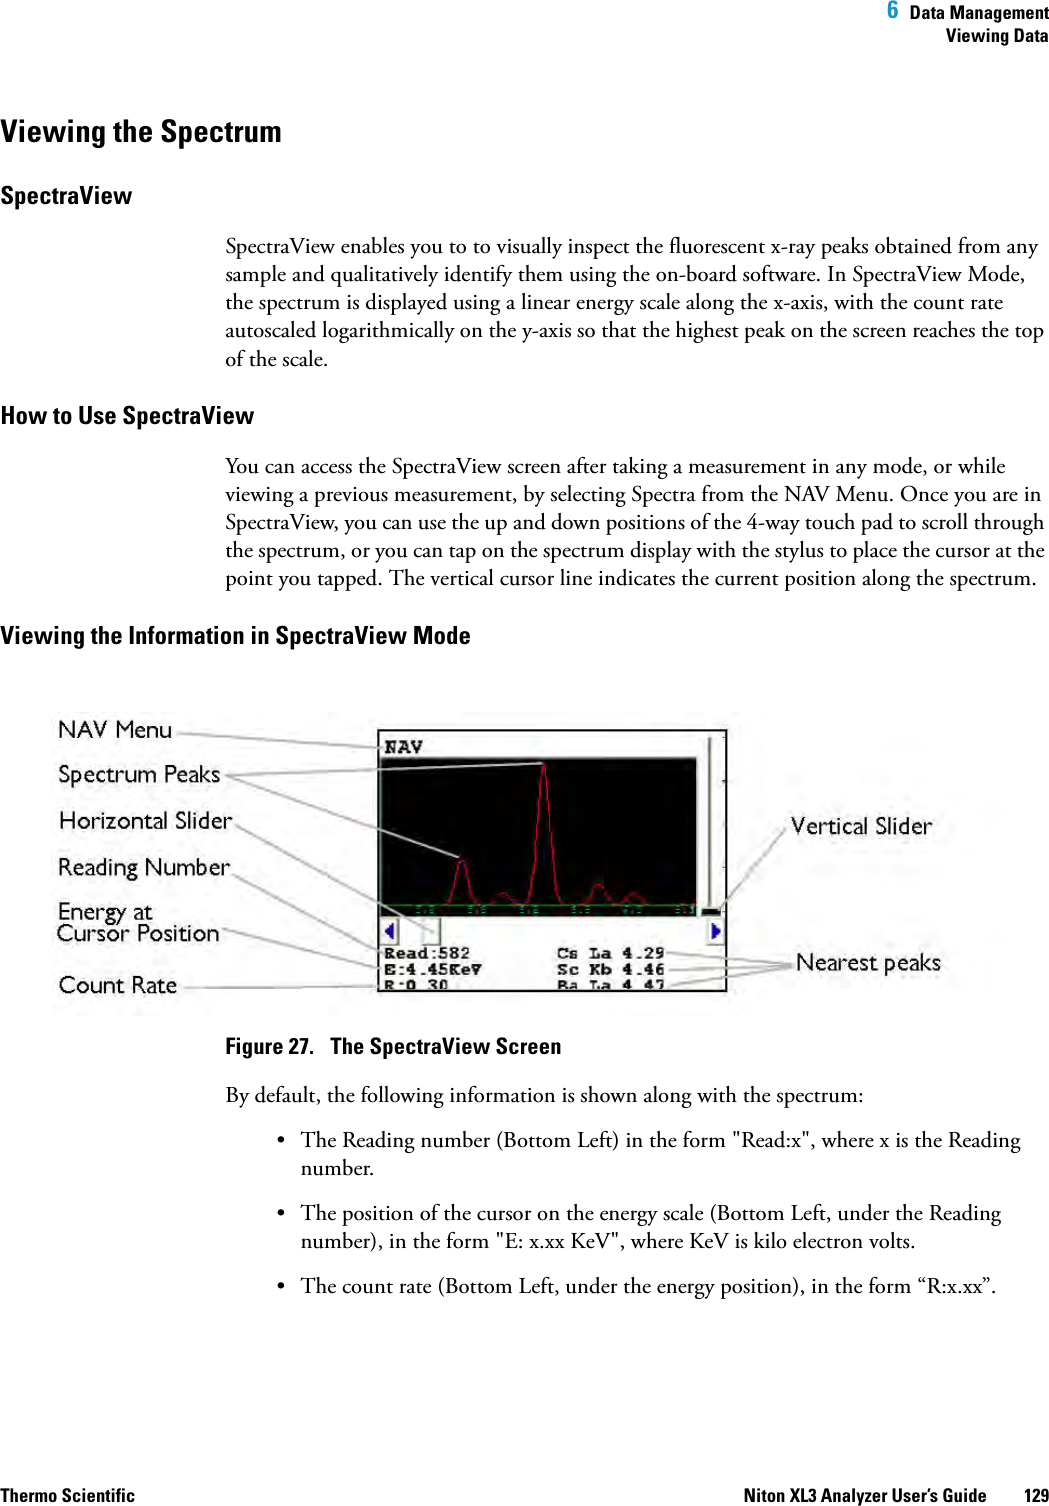  6  Data ManagementViewing DataThermo Scientific Niton XL3 Analyzer User’s Guide 129Viewing the SpectrumSpectraViewSpectraView enables you to to visually inspect the fluorescent x-ray peaks obtained from any sample and qualitatively identify them using the on-board software. In SpectraView Mode, the spectrum is displayed using a linear energy scale along the x-axis, with the count rate autoscaled logarithmically on the y-axis so that the highest peak on the screen reaches the top of the scale.How to Use SpectraView You can access the SpectraView screen after taking a measurement in any mode, or while viewing a previous measurement, by selecting Spectra from the NAV Menu. Once you are in SpectraView, you can use the up and down positions of the 4-way touch pad to scroll through the spectrum, or you can tap on the spectrum display with the stylus to place the cursor at the point you tapped. The vertical cursor line indicates the current position along the spectrum.Viewing the Information in SpectraView ModeFigure 27.  The SpectraView ScreenBy default, the following information is shown along with the spectrum:• The Reading number (Bottom Left) in the form &quot;Read:x&quot;, where x is the Reading number.• The position of the cursor on the energy scale (Bottom Left, under the Reading number), in the form &quot;E: x.xx KeV&quot;, where KeV is kilo electron volts.• The count rate (Bottom Left, under the energy position), in the form “R:x.xx”.